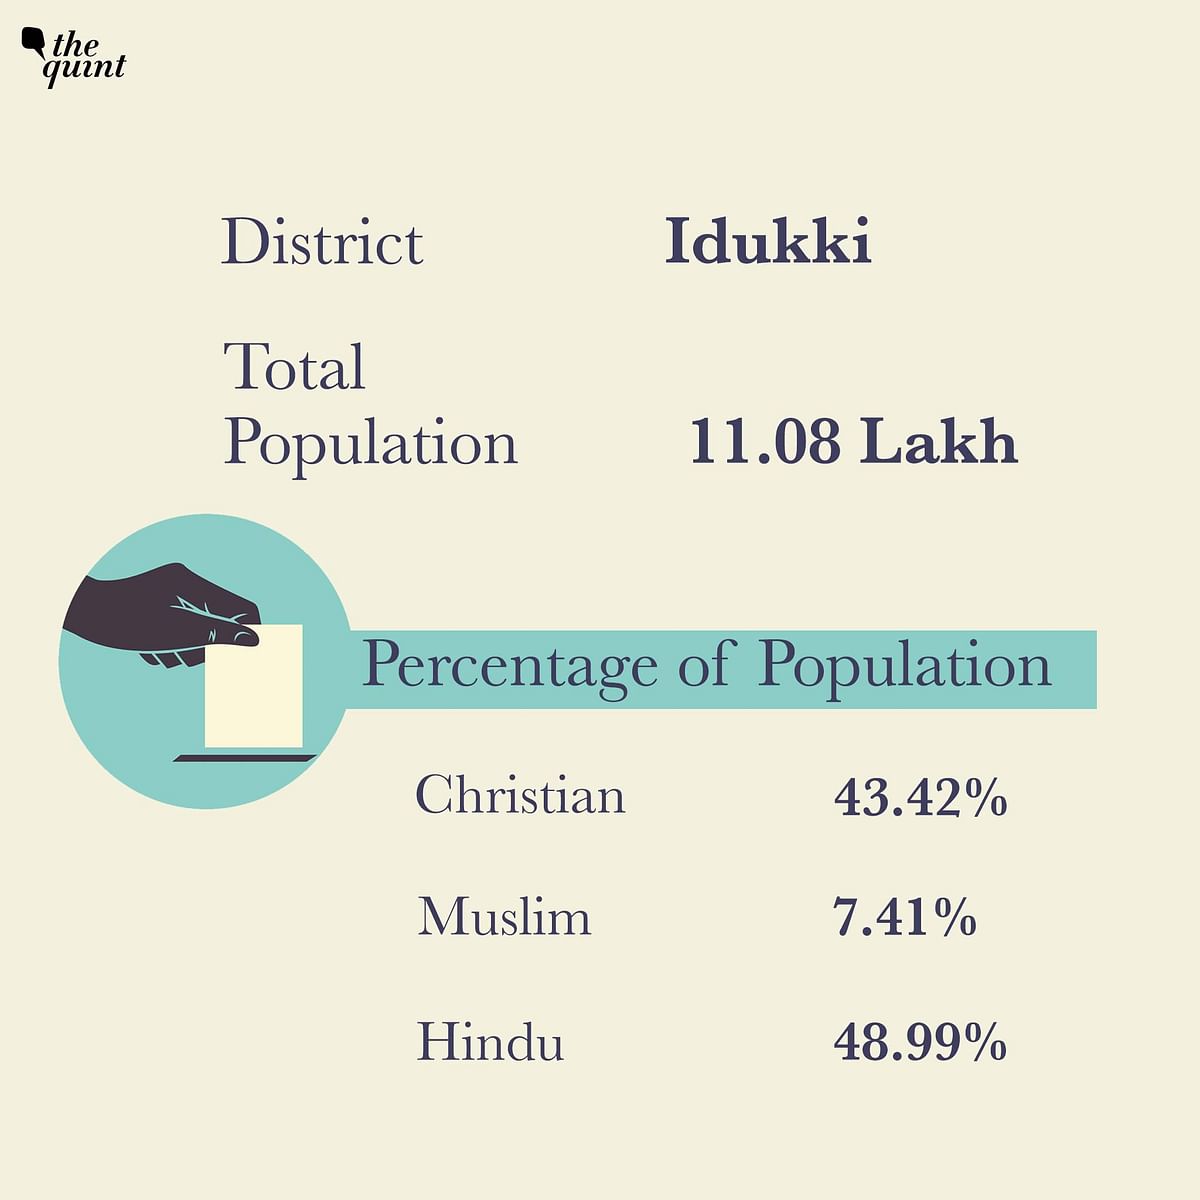 Christians form 43.42 per cent of the population in Idukki district.